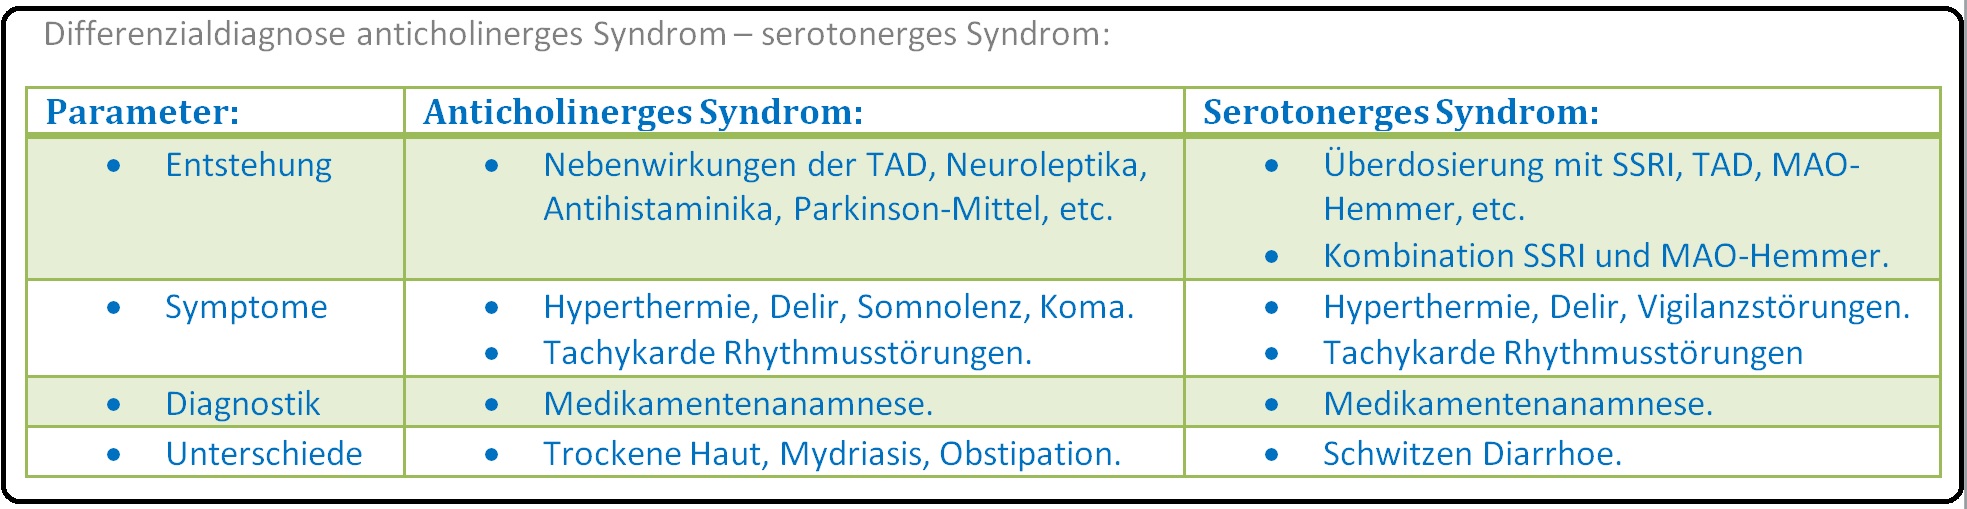 578 Differenzialdiagnose anticholinerges Syndrom   serotonerges Syndrom